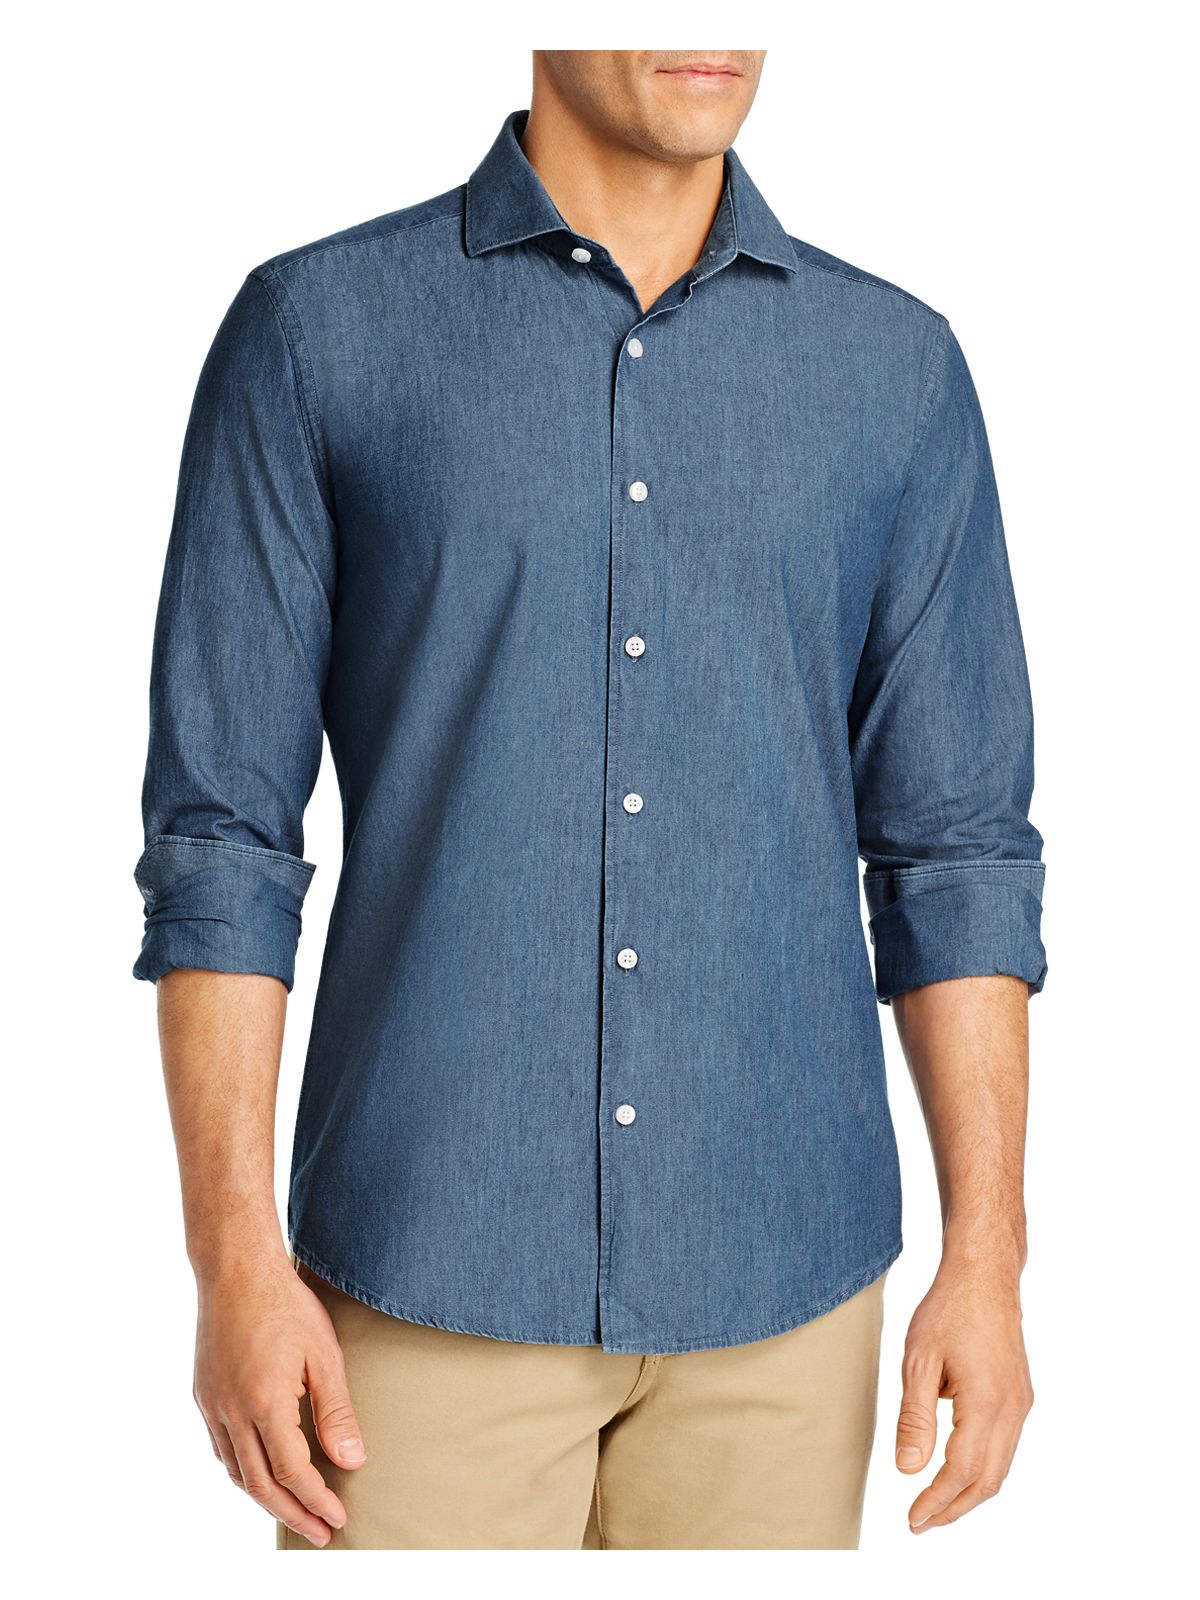 DYLAN GRAY Mens Blue Long Sleeve Classic Fit Button Down Casual Shirt L